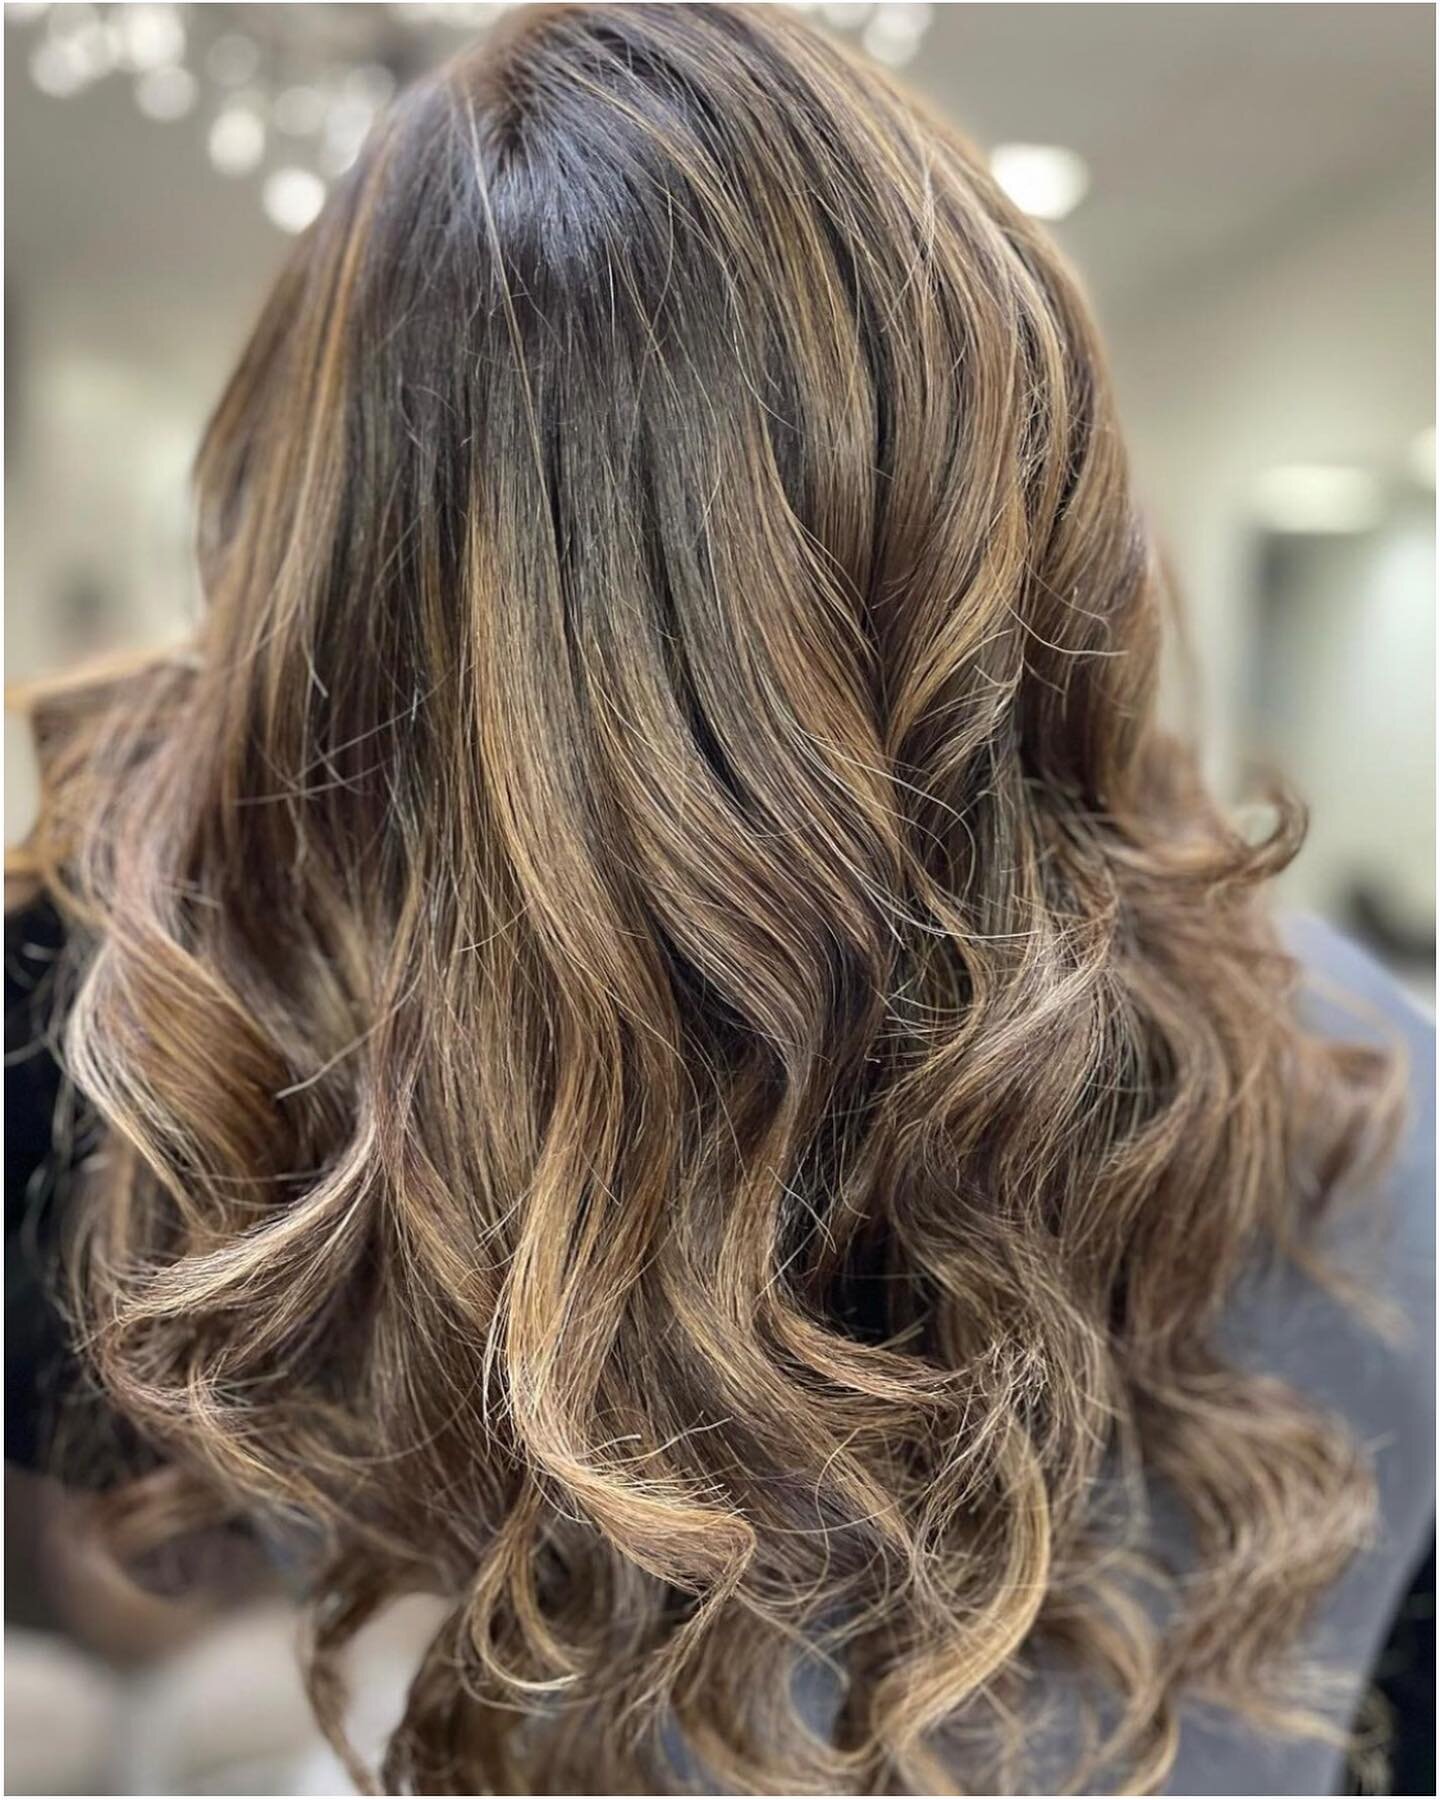 dimensional color by Heather | style by Nunzia
&bull;
&bull;
&bull;
#themakeupstudiony #thestudiony #hair #brunette #dimensionalcolor #highlights #brunettehair #hairstylist #haircolorist #hairstyles #kerastase #behindthechair #hairsalonfeed #maneinte